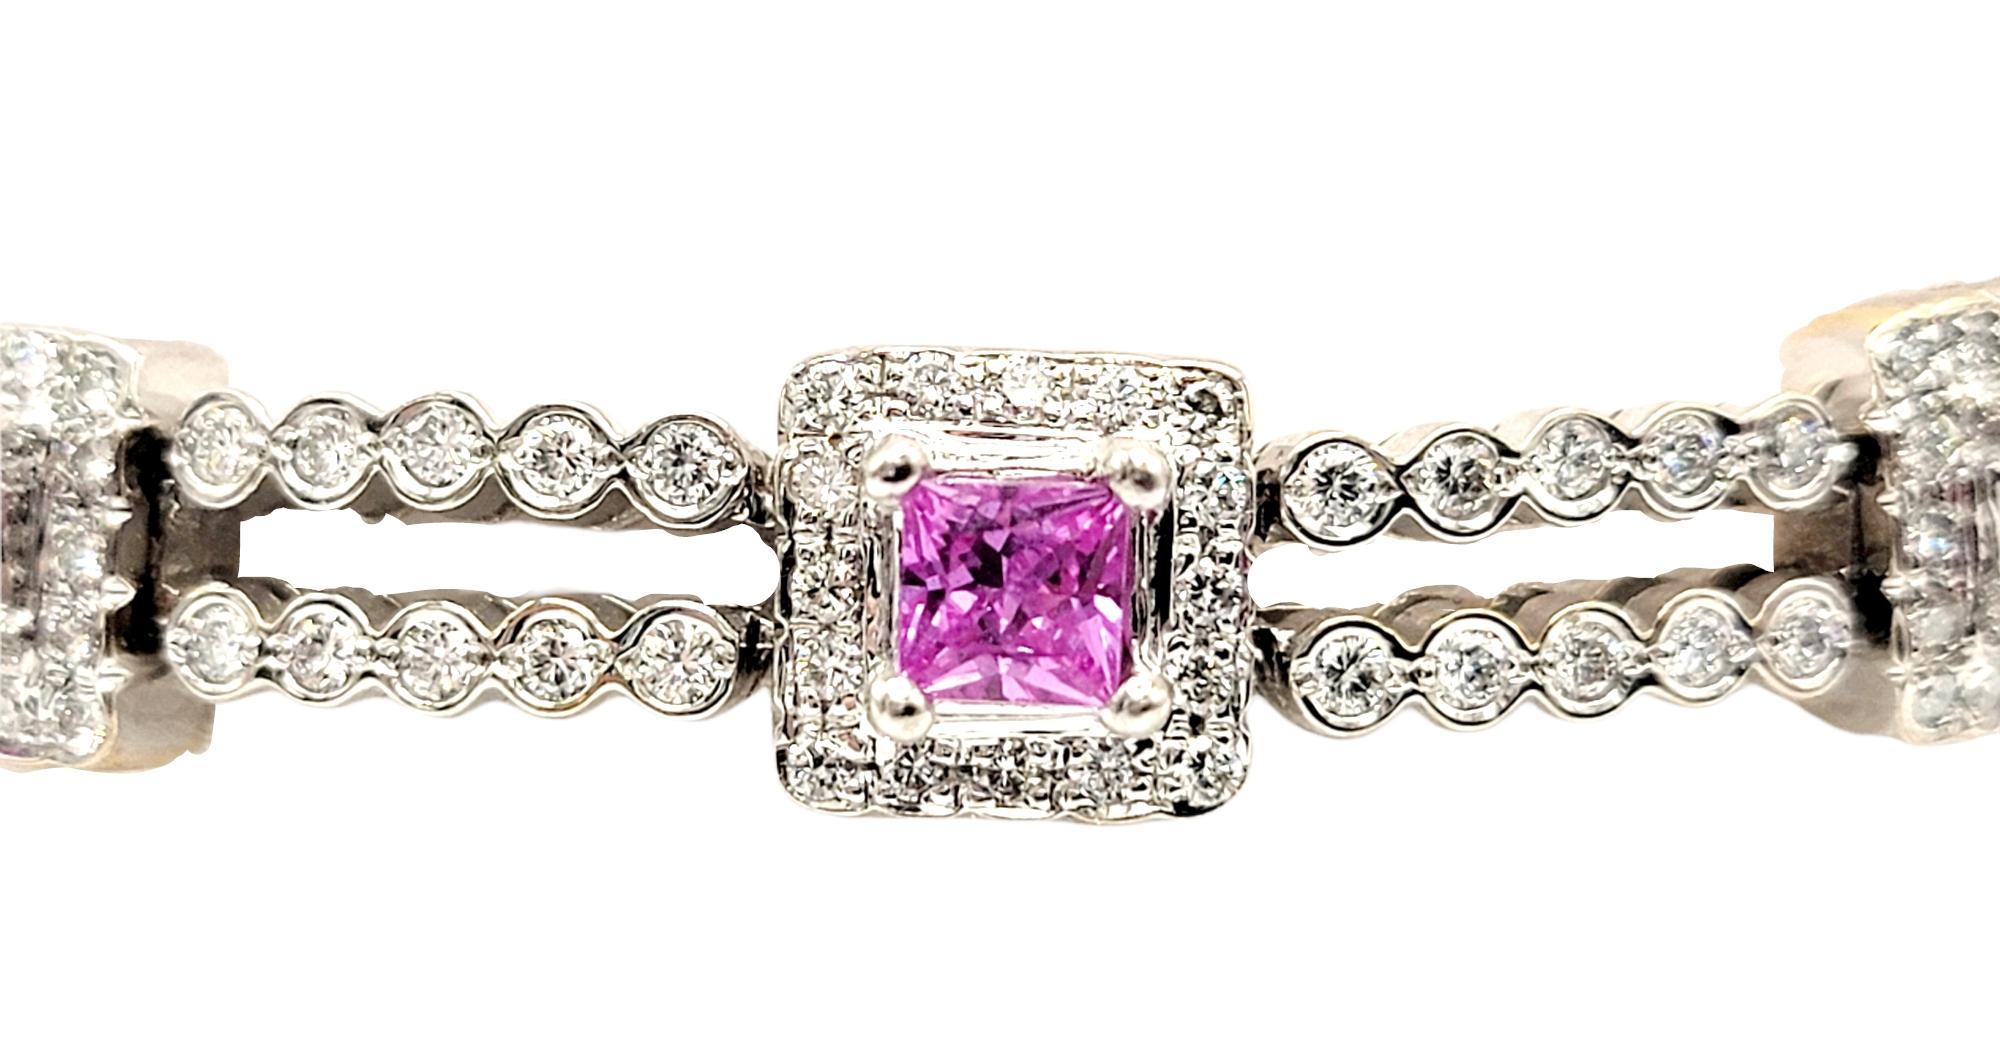 Diamond Line Bracelet with Princess Pink Sapphire Stations 18 Karat White Gold In Good Condition For Sale In Scottsdale, AZ